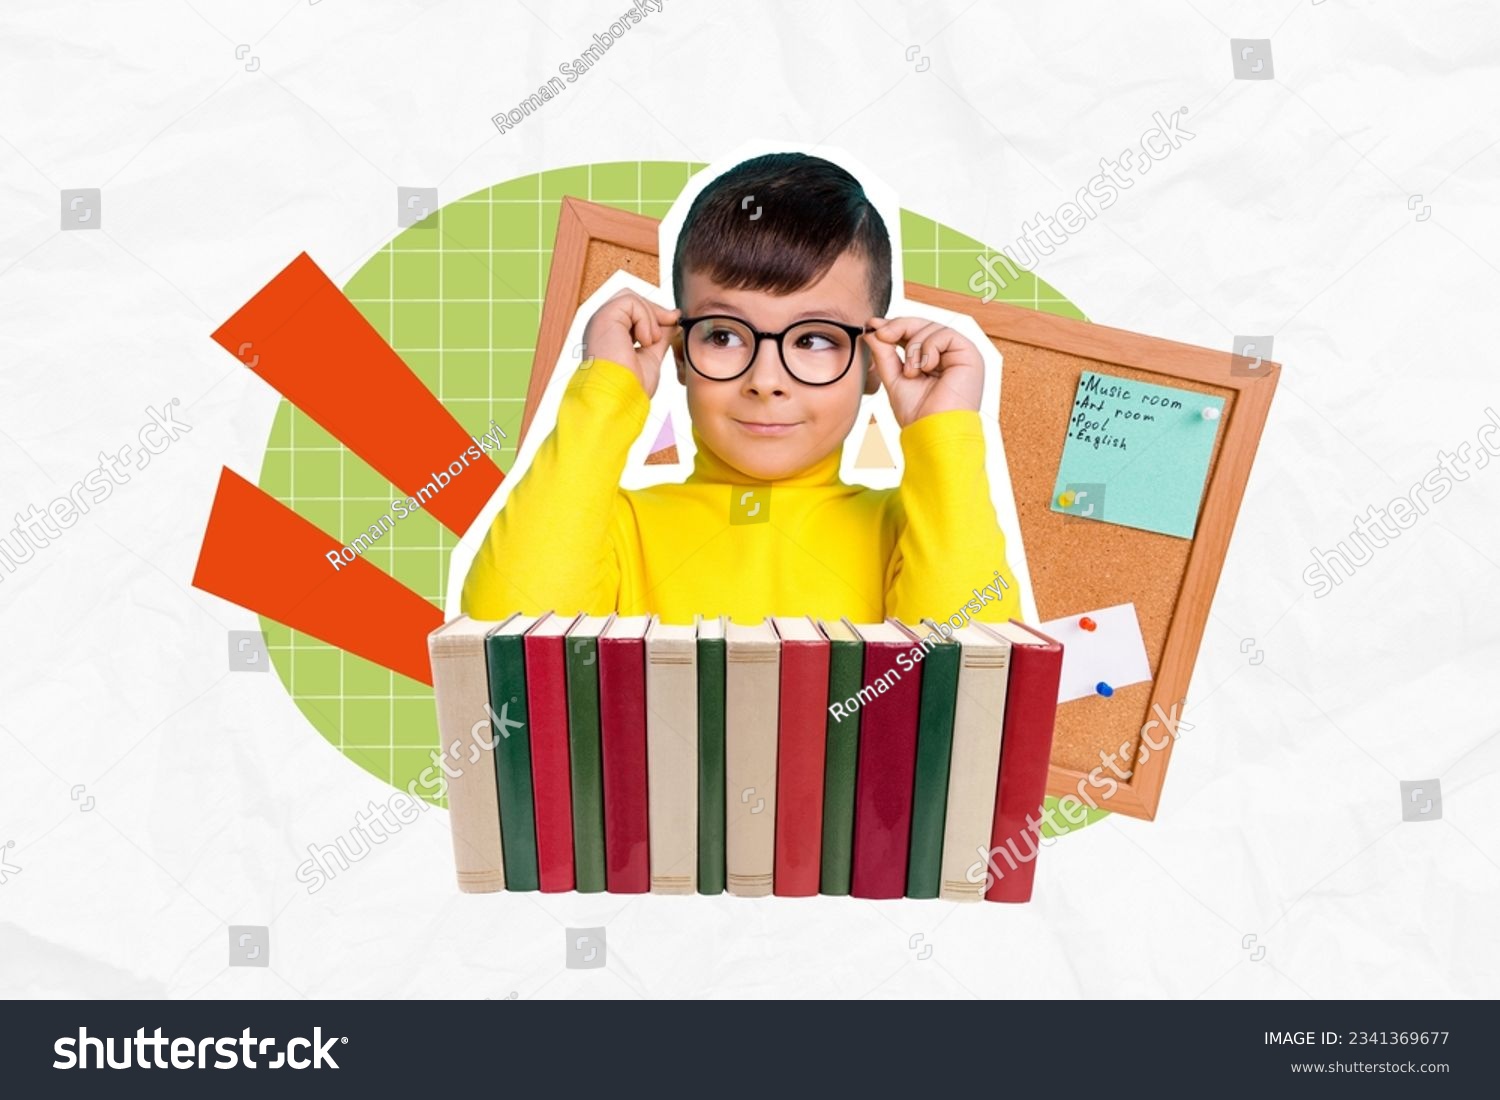 Collage of young funny schoolkid wearing eyeglasses intellect read much books library pin desk schedule lesson isolated on white background #2341369677